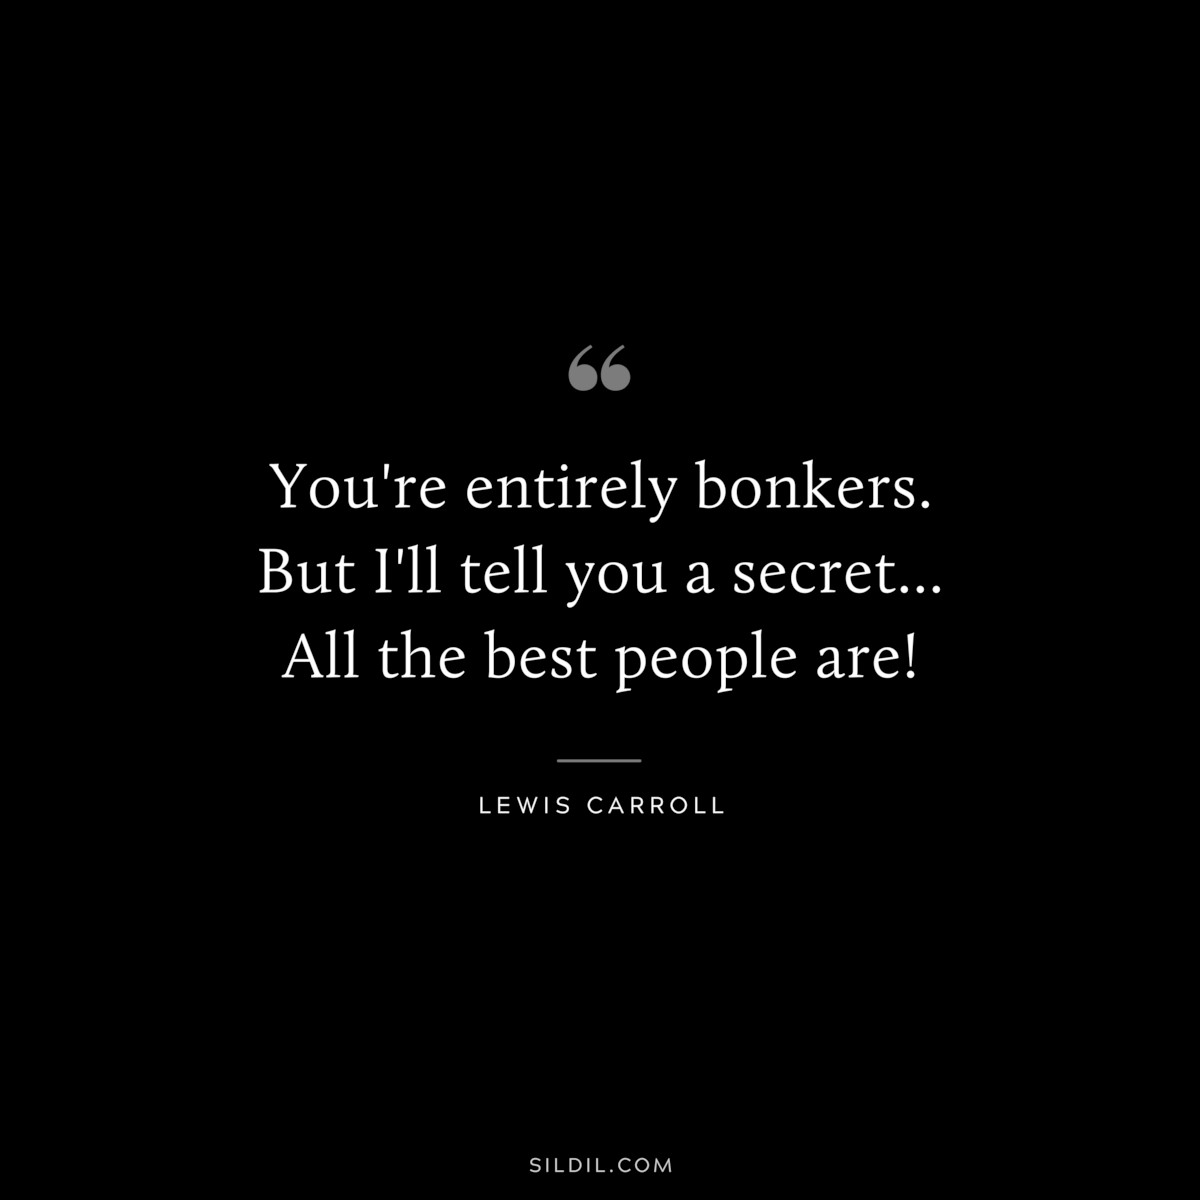 You're entirely bonkers. But I'll tell you a secret... All the best people are!